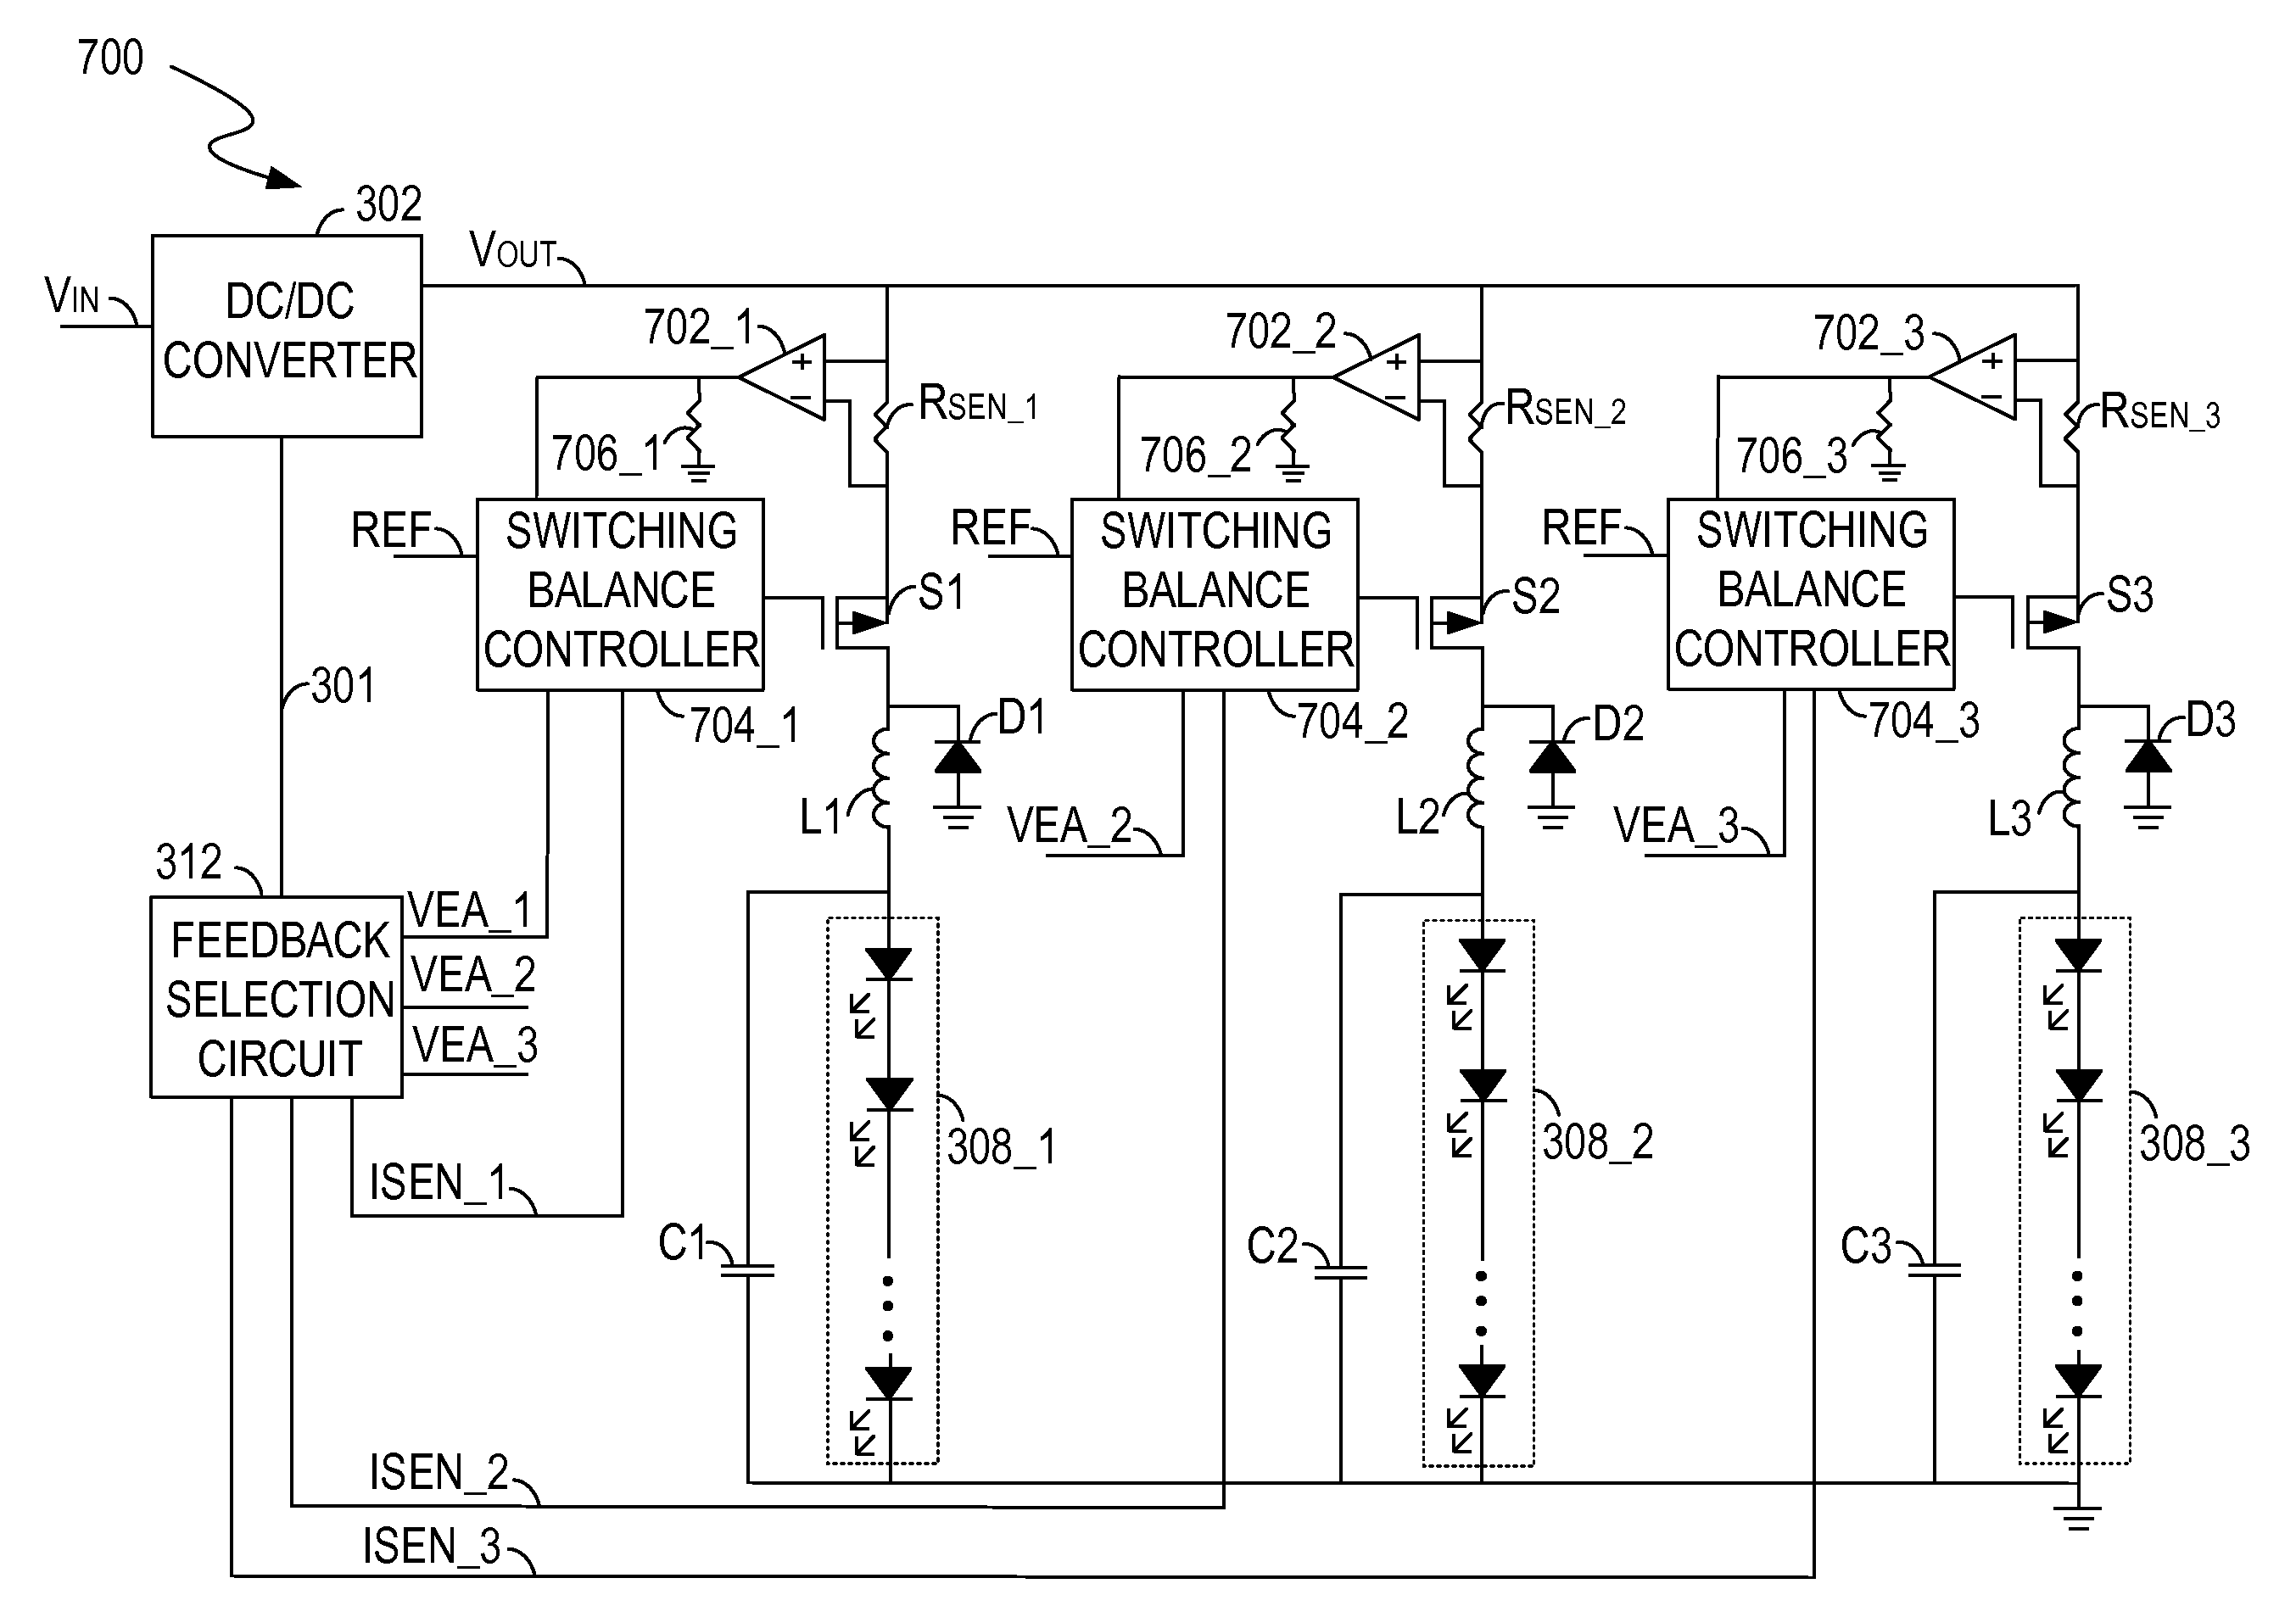 Circuits and methods for powering light sources